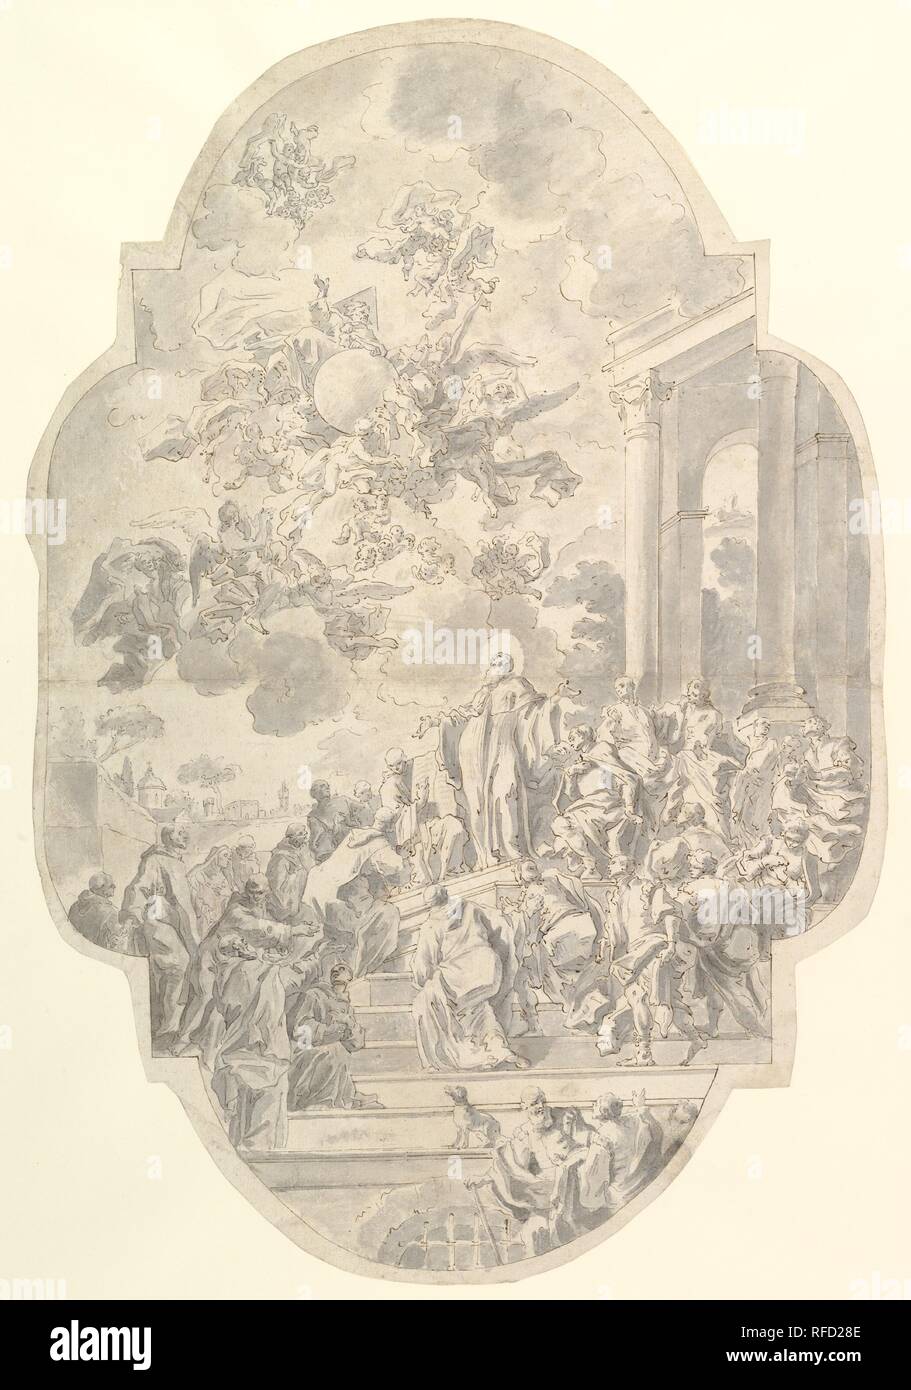 The Vision of Saint Benedict. Artist: Francesco de Mura (Italian, Naples 1696-1782 Naples). Dimensions: 22-1/4 x 15 in.  (56.5 x 38.1 cm). Date: 1740.  Saint Benedict stands at the center of the composition, looking upward at an apparition of the Holy Trinity, while around the saint are gathered members of the male and female religious orders that follow his monastic rule, as well as lay men and women devoted to his cult. The drawing is a study with a number of variations for a ceiling fresco, signed by de Mura and dated 1740, at the center of the nave of the Neapolitan church of Saints Severi Stock Photo